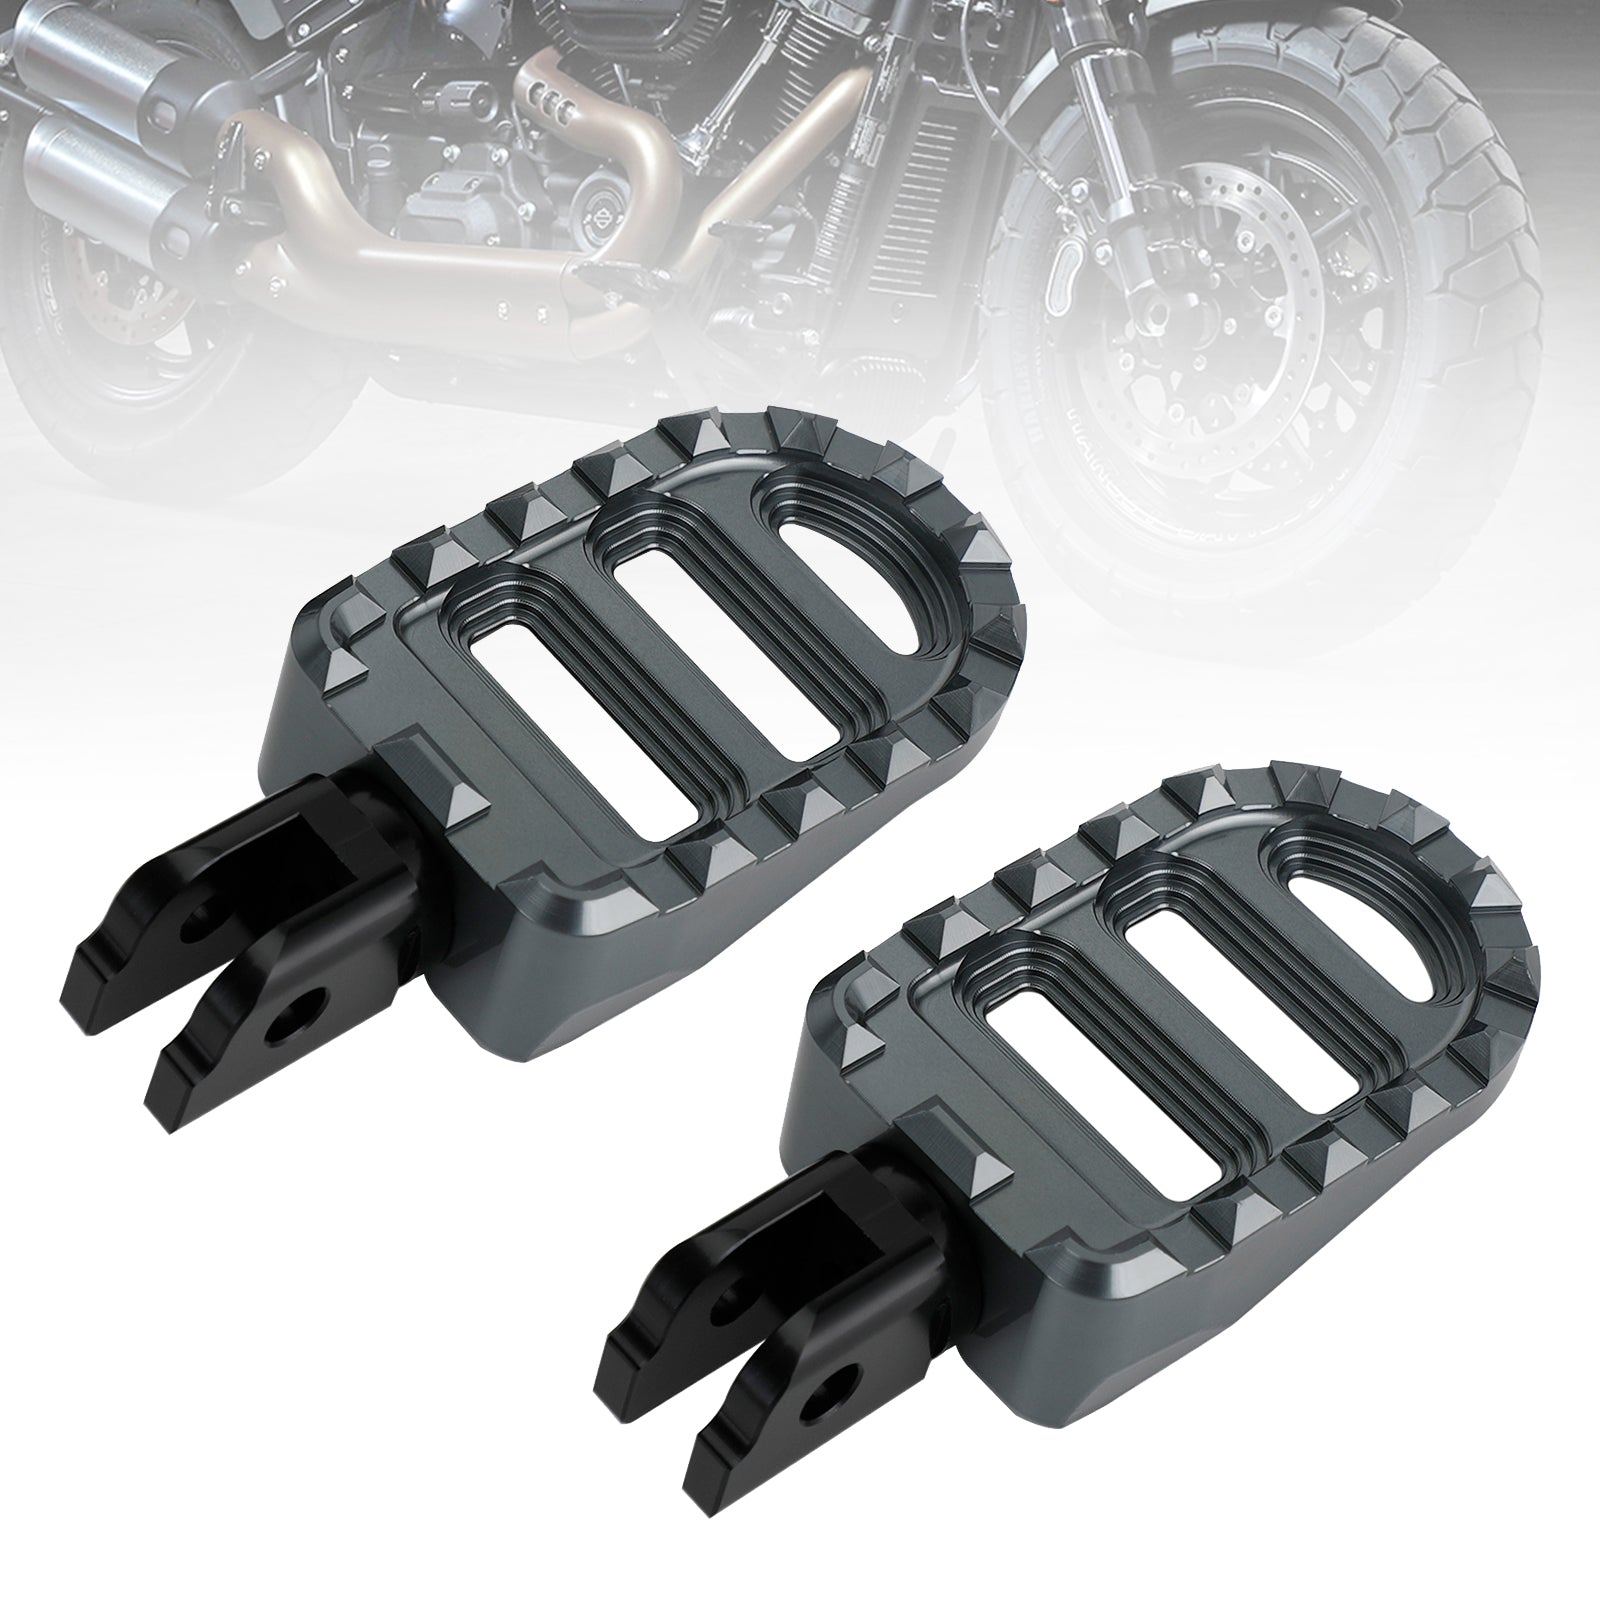 Front Footrests Foot Peg fit for Sportster S Lower Rider Fat Bob Softail Slim